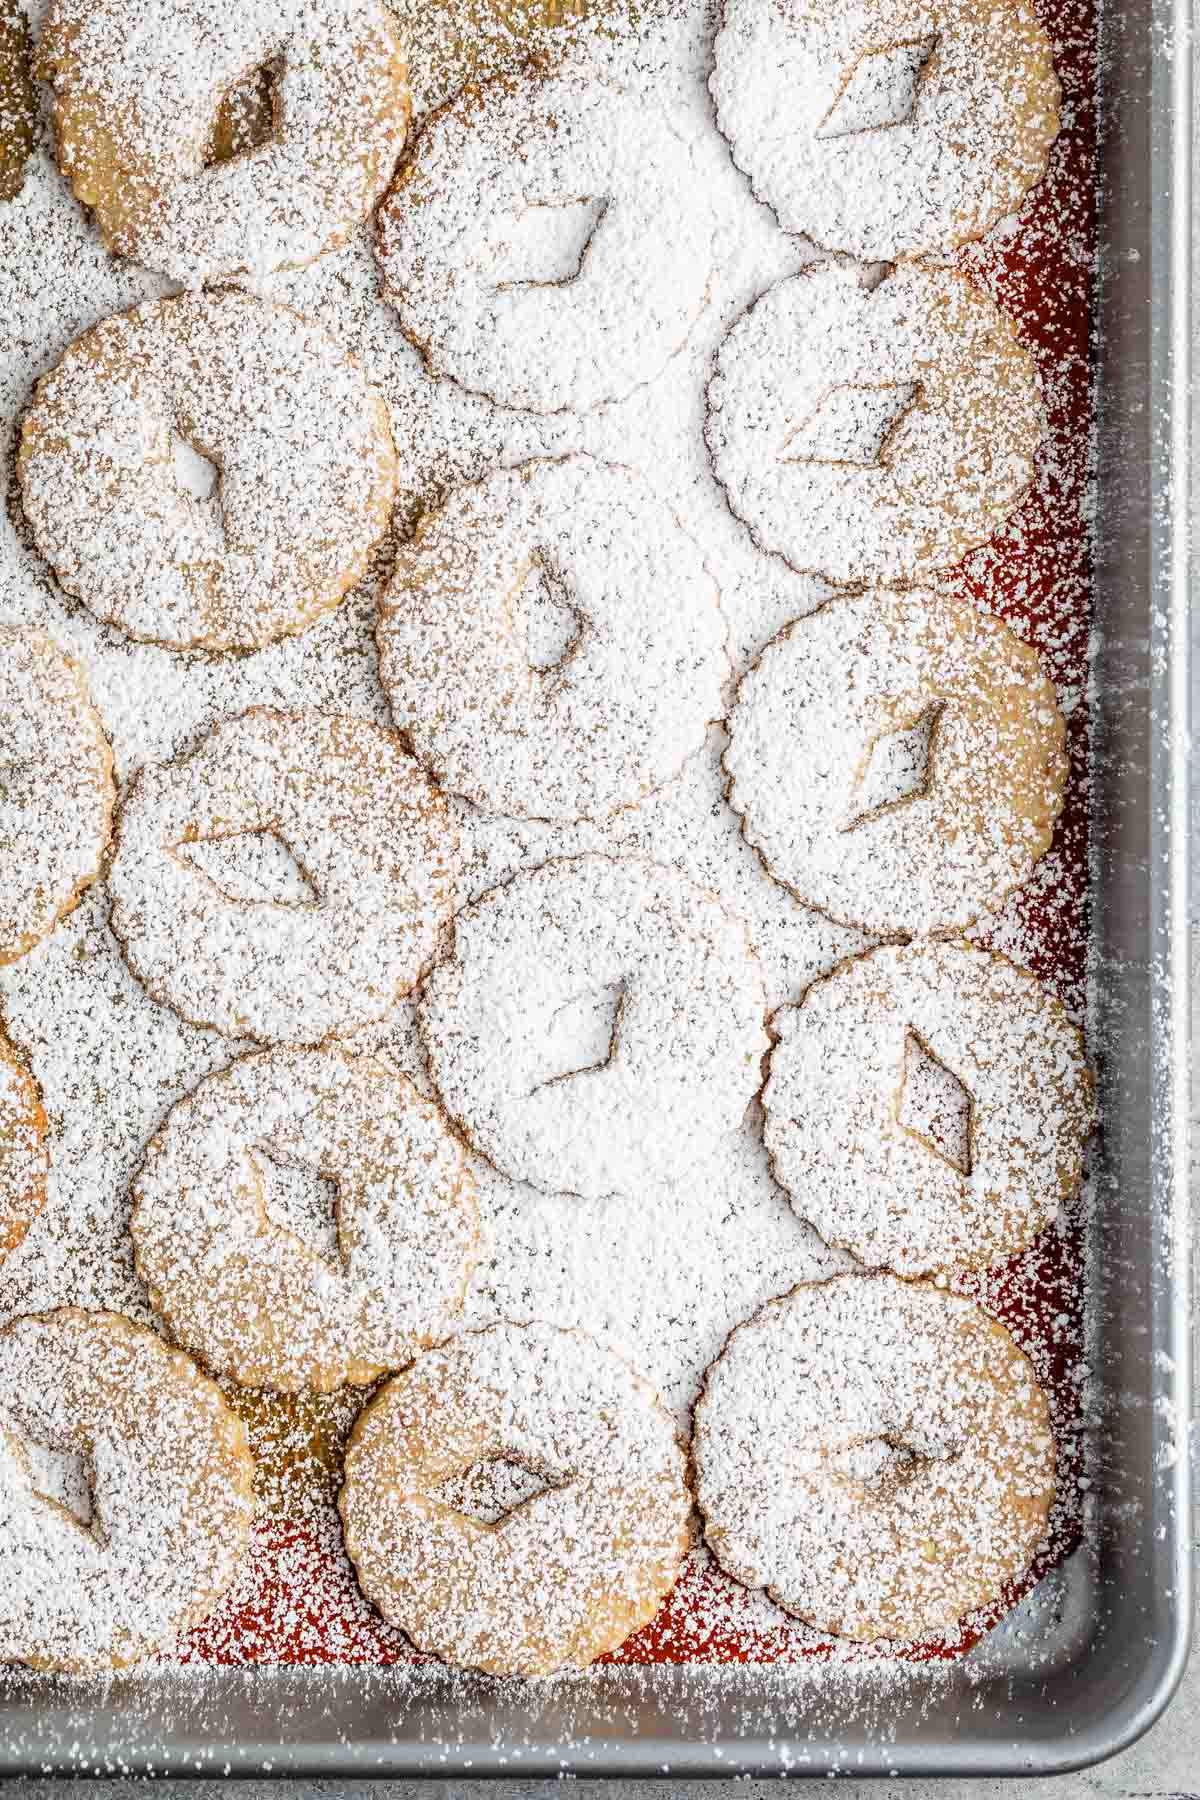 cookie tops on cookie sheet dusted with powdered sugar.